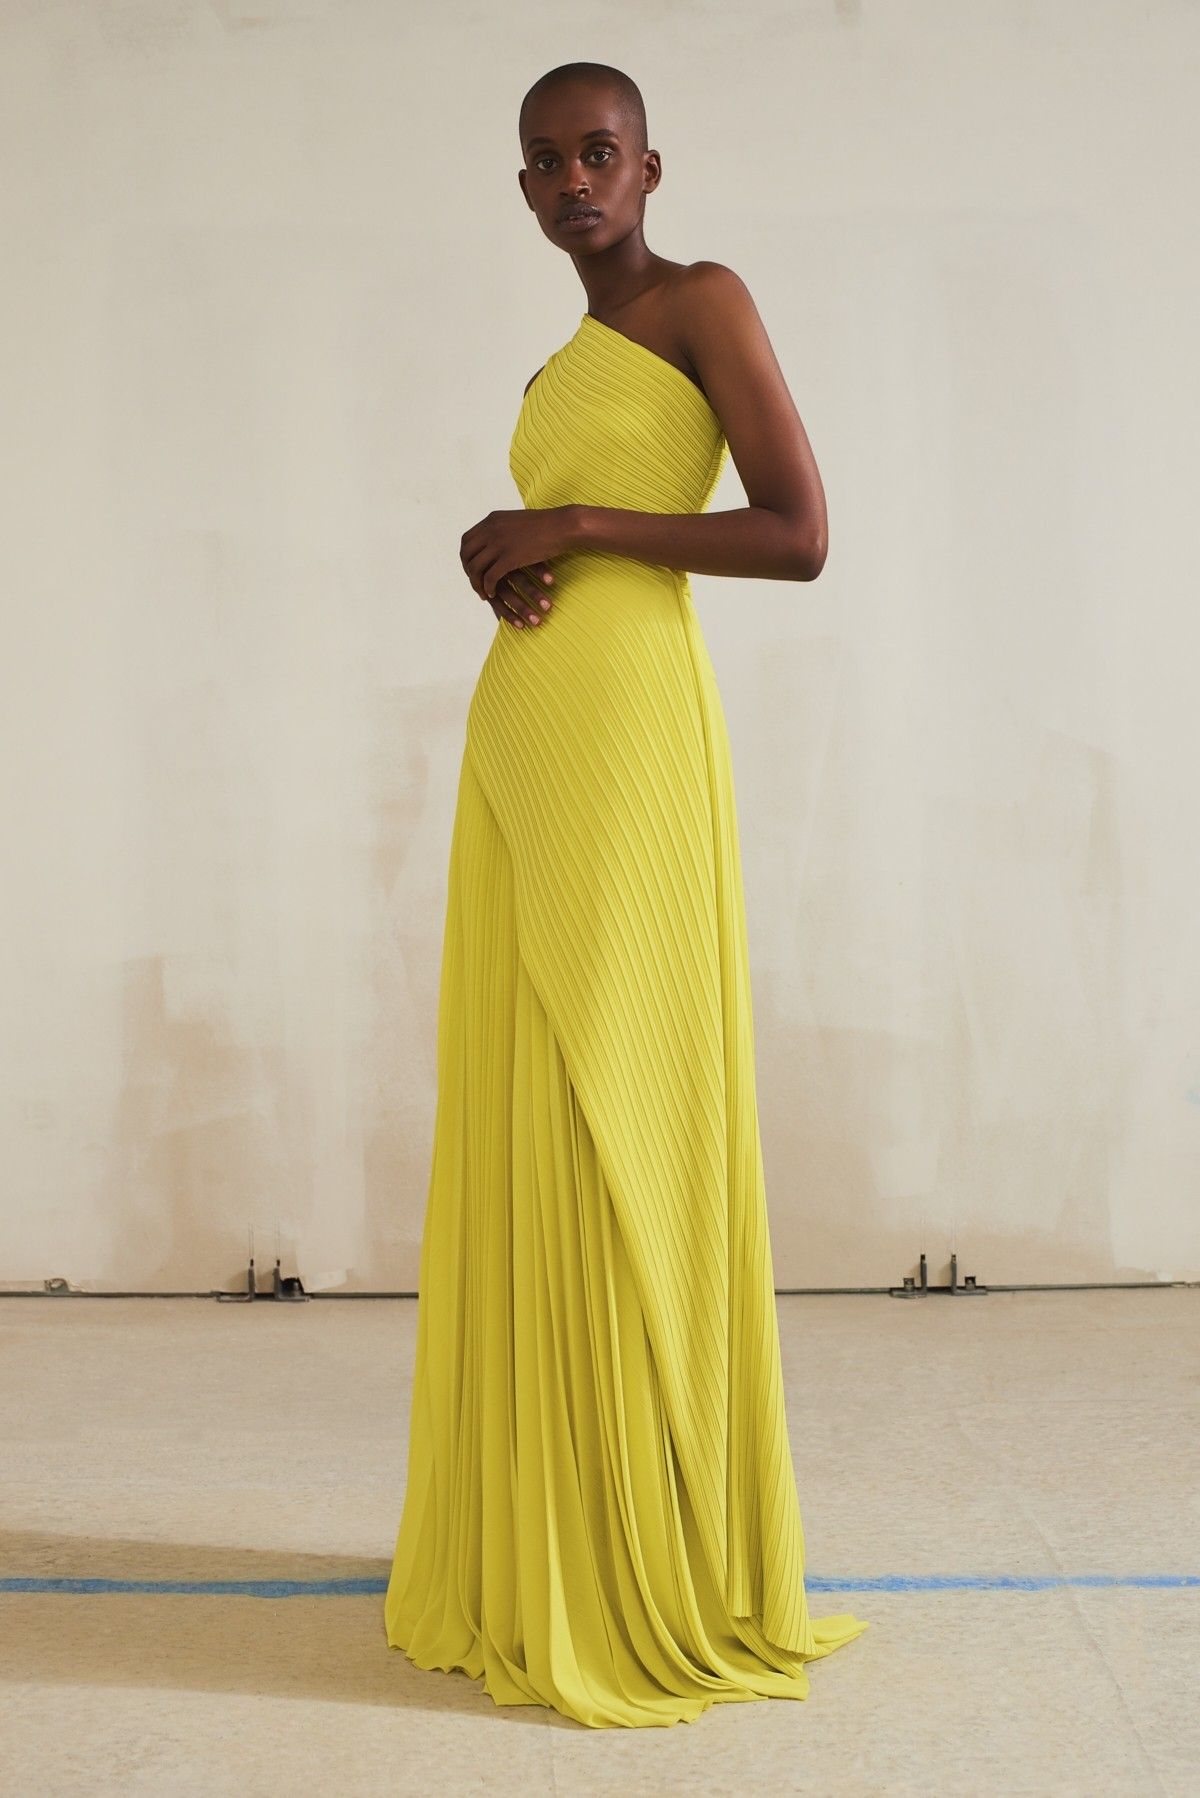 Styling Vibrant Yellow Dresses: Chic Outfit Ideas for Any Occasion